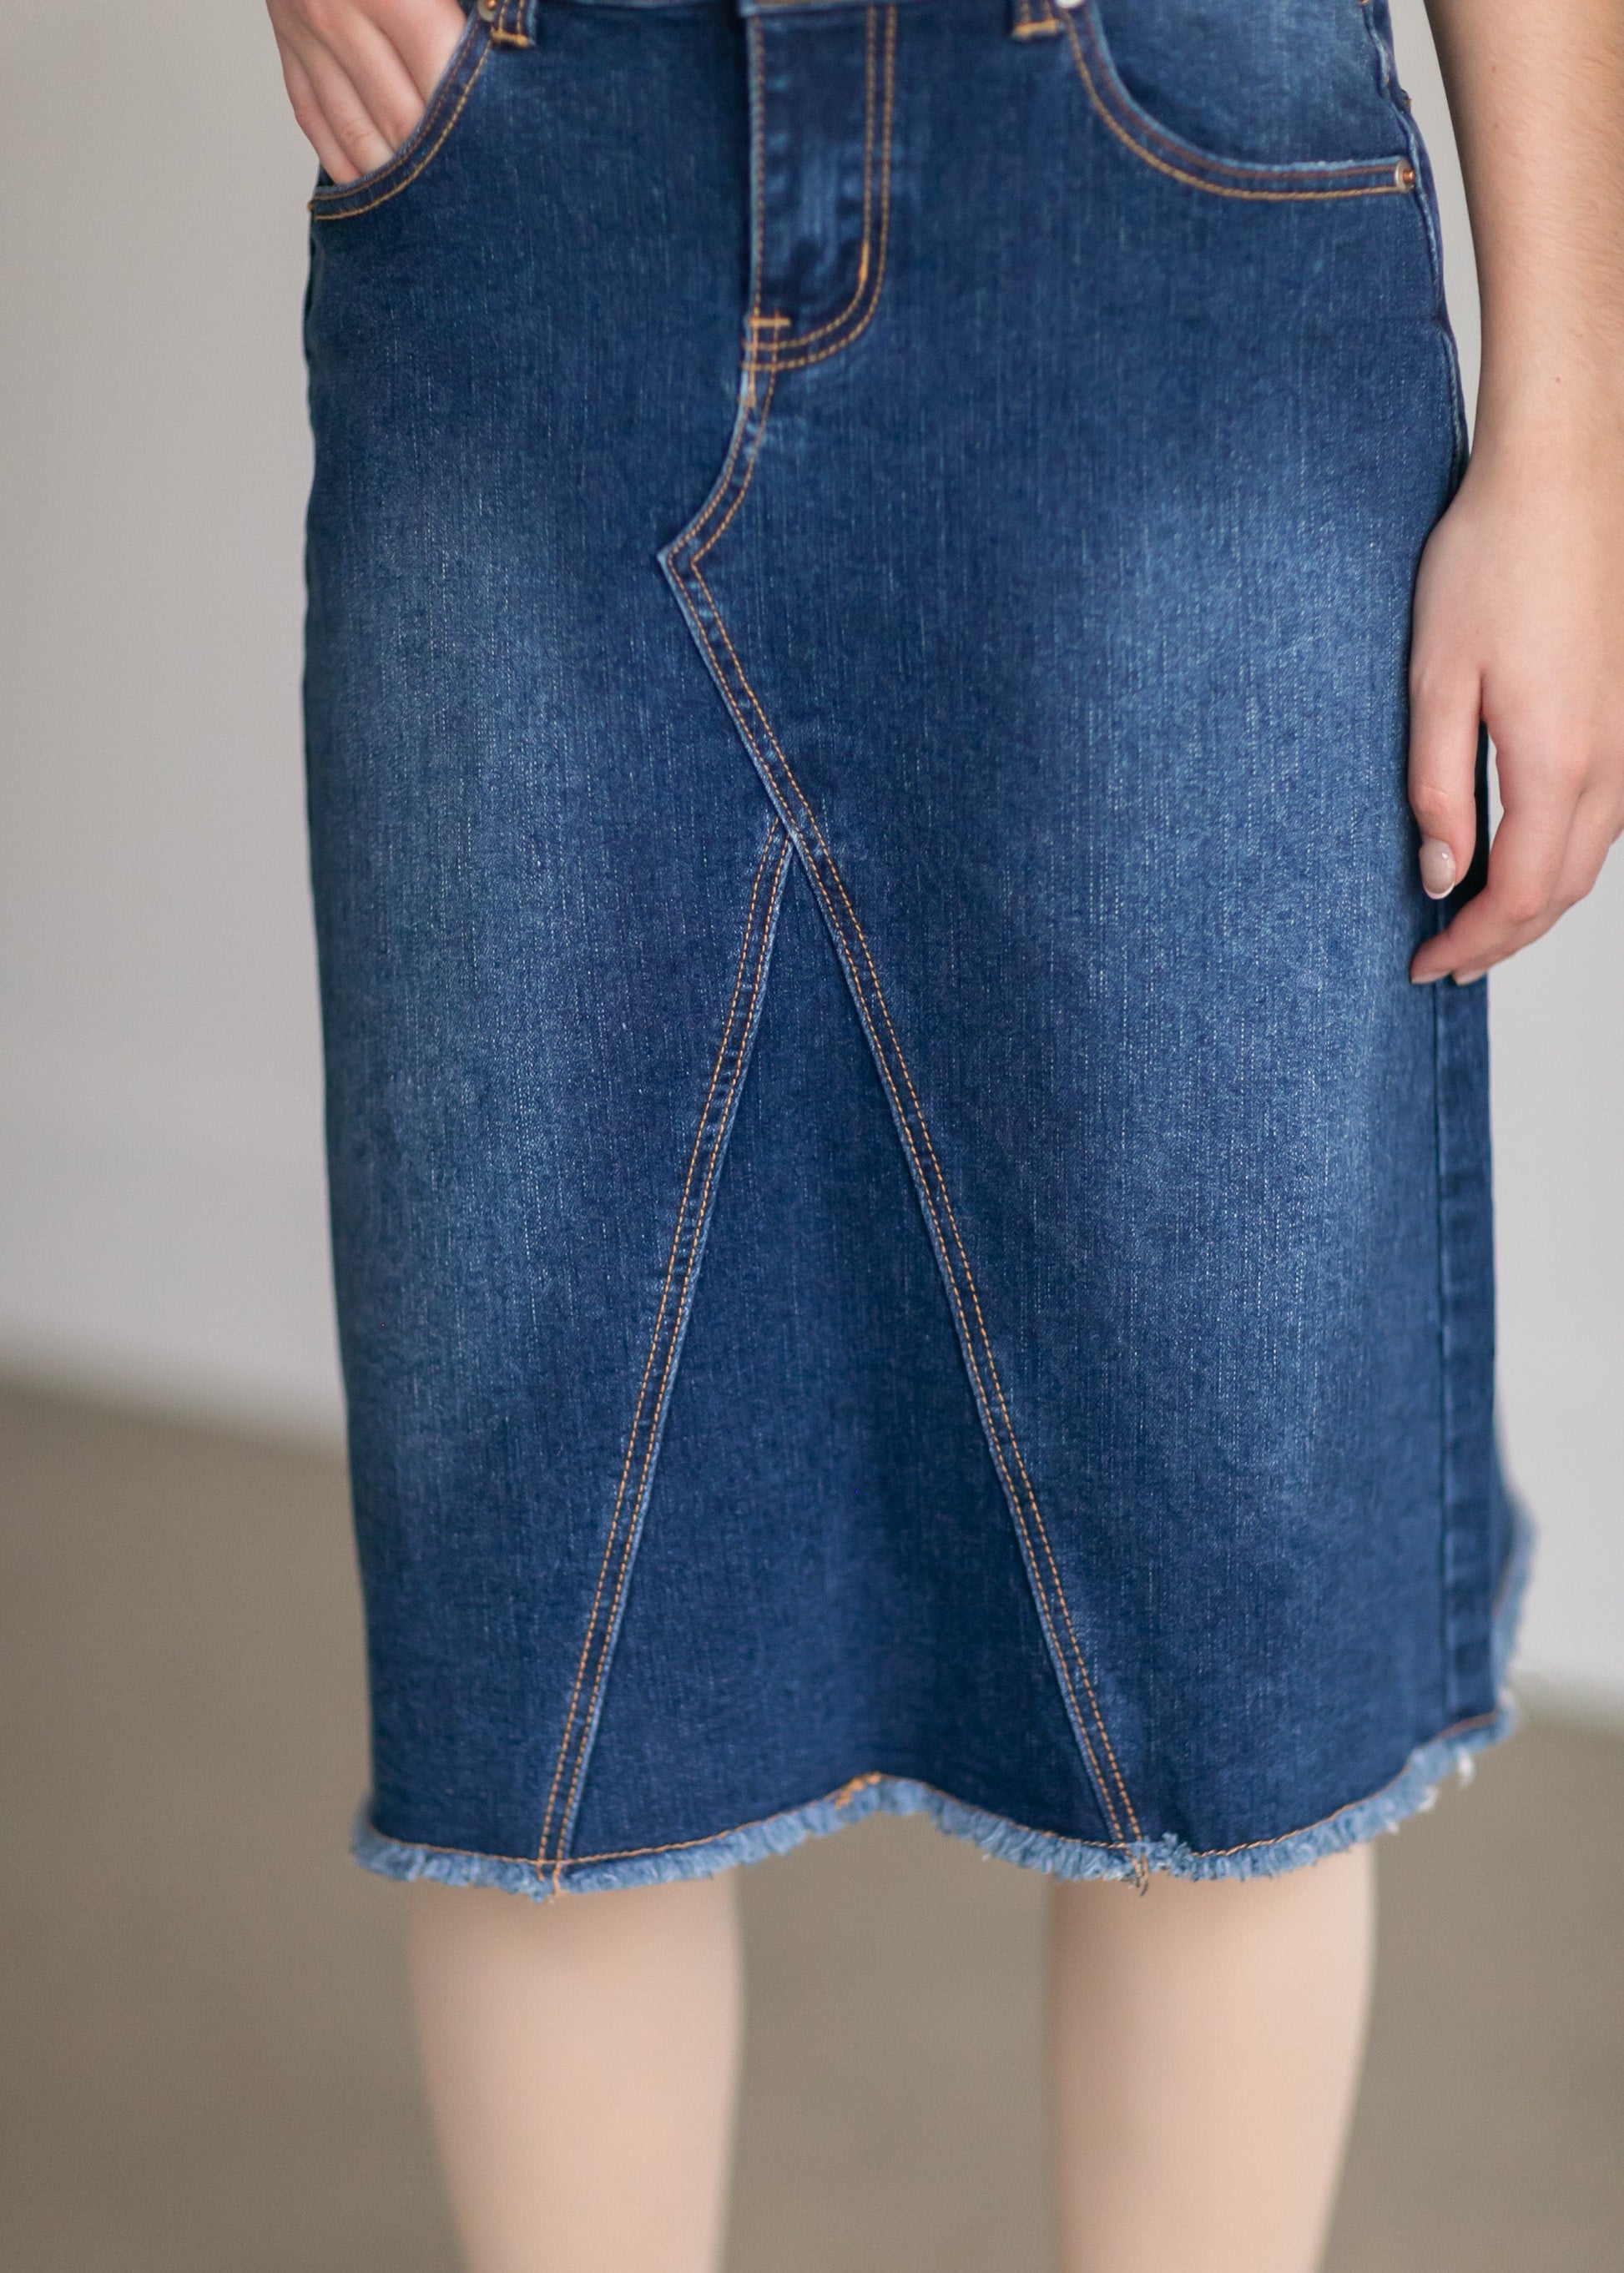 The Riley Frayed Hem Denim Midi Skirt is an Inherit Design that is full of lovely details! It is tailored in a slight a-line fit and super comfortable for anyone wanting that timeless look! This skirt is a darker wash with contrast stitching with a v-stitch in the front and back. You will love the raw bottom hem and the faux leather patch on the back!